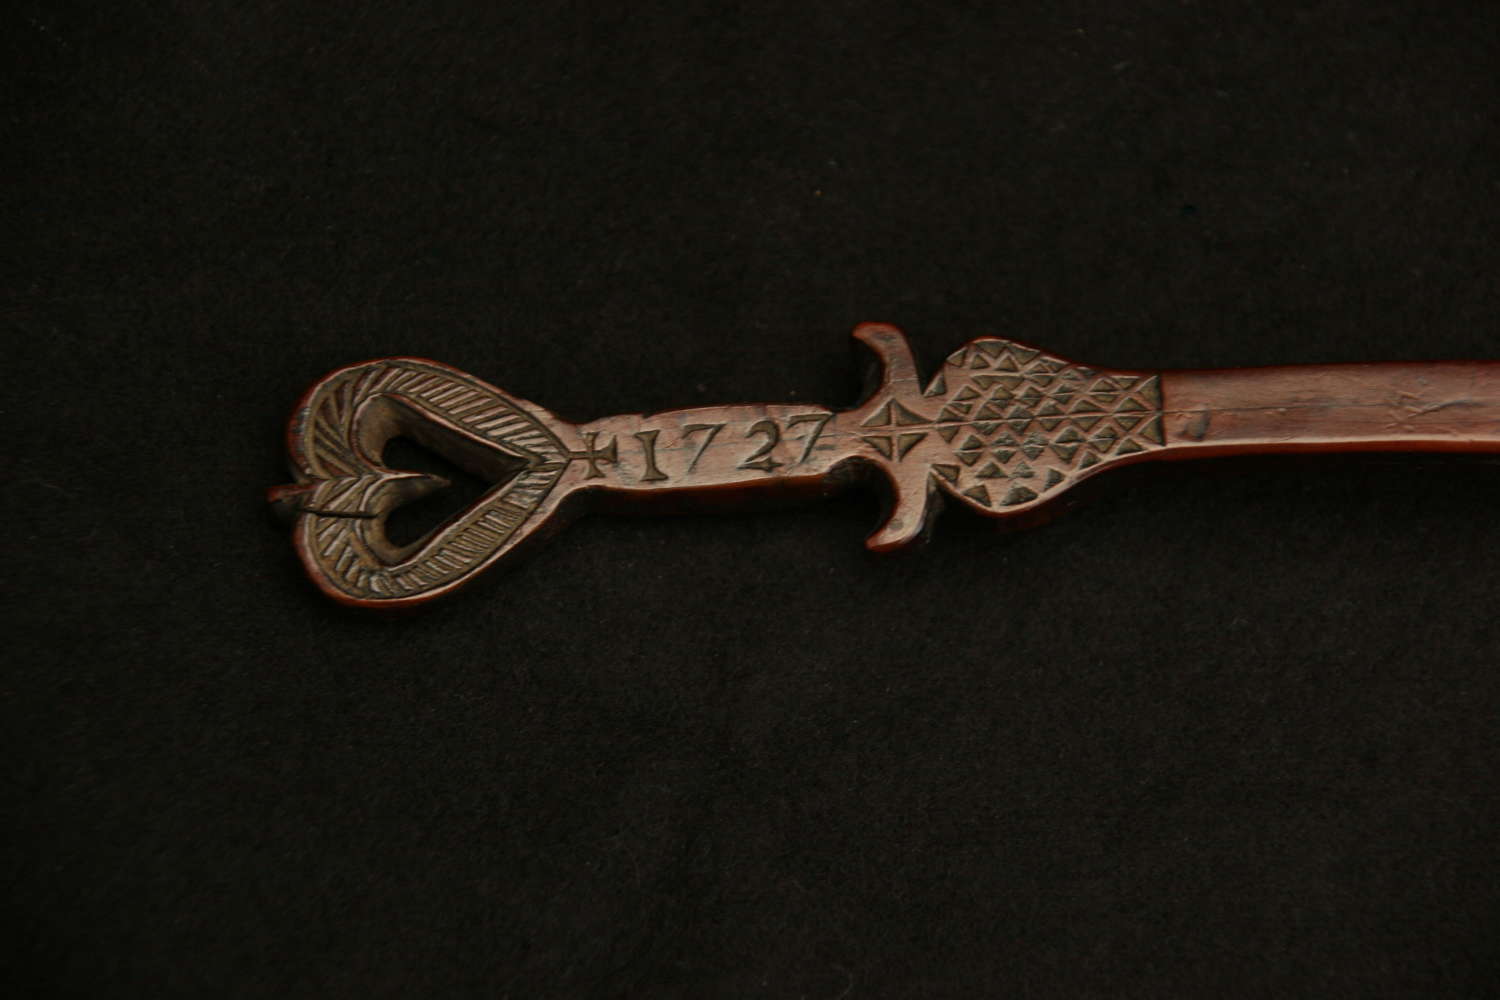 Yew Wood Welsh Love Spoon dated 1727